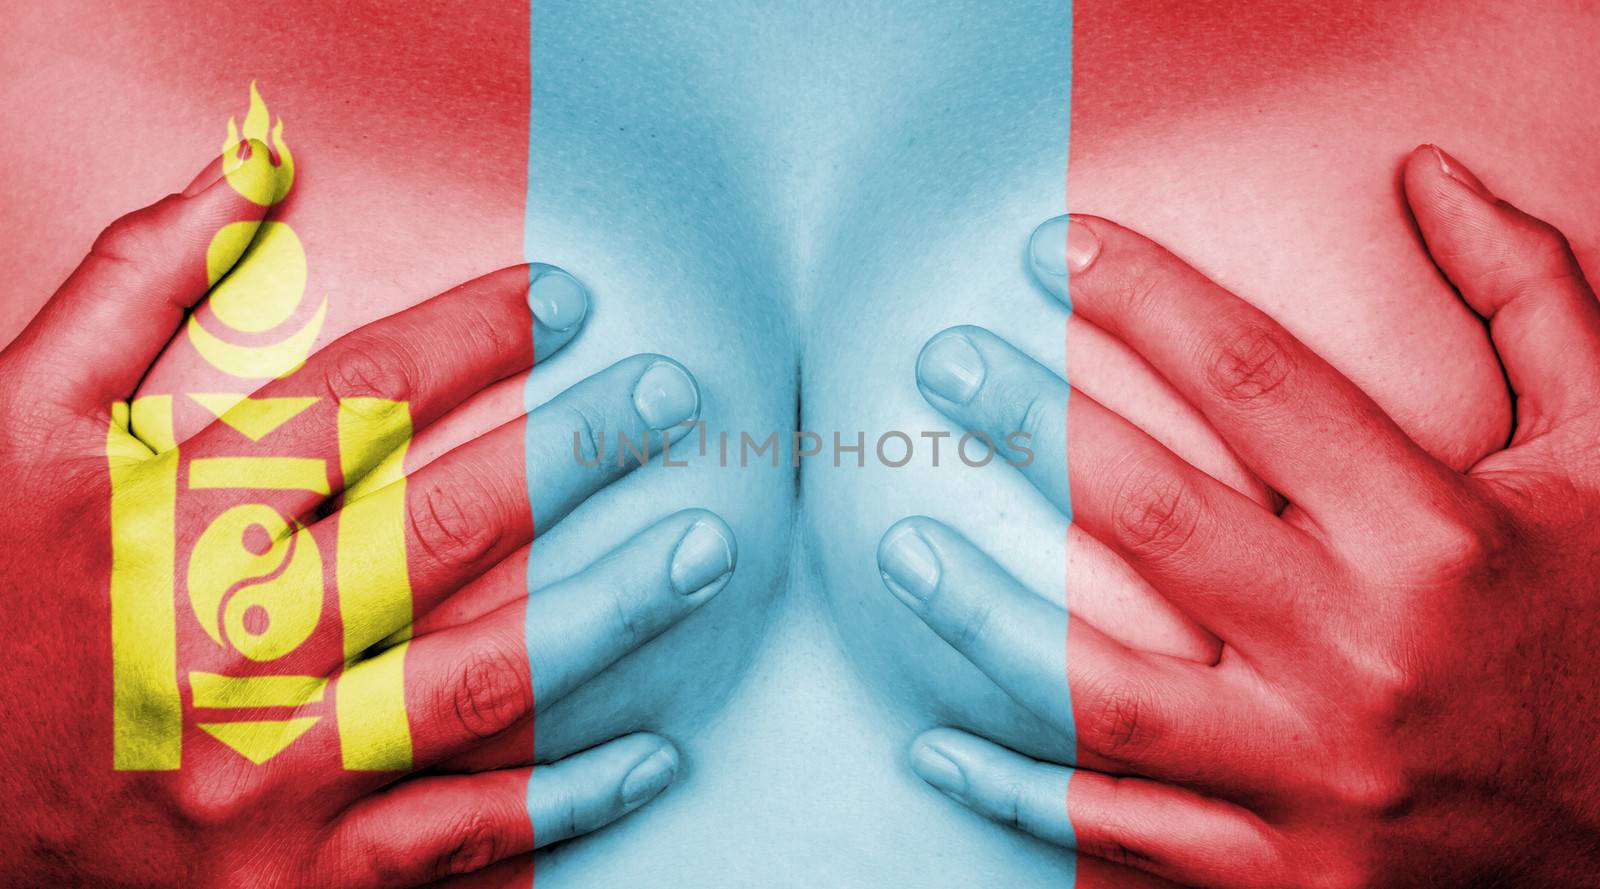 Upper part of female body, hands covering breasts, flag of Mongolia